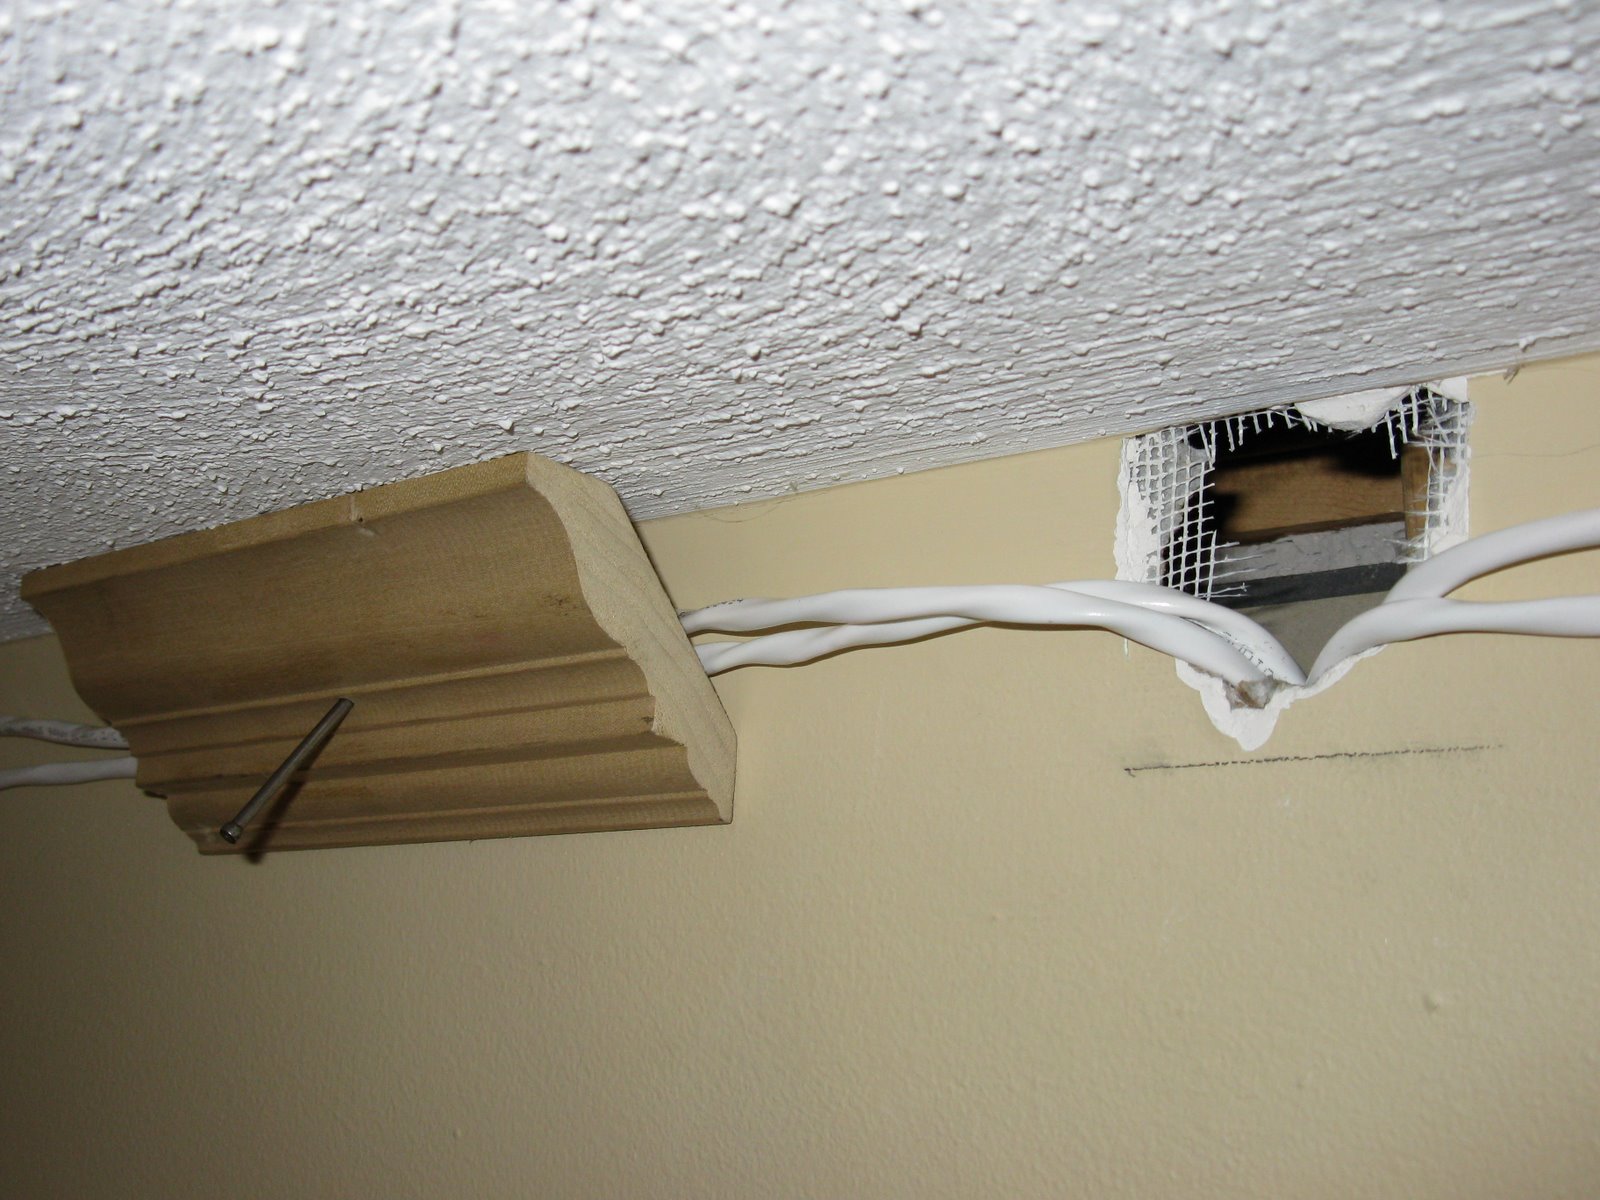 How to hide wall mounted speaker wires in your apartment for under